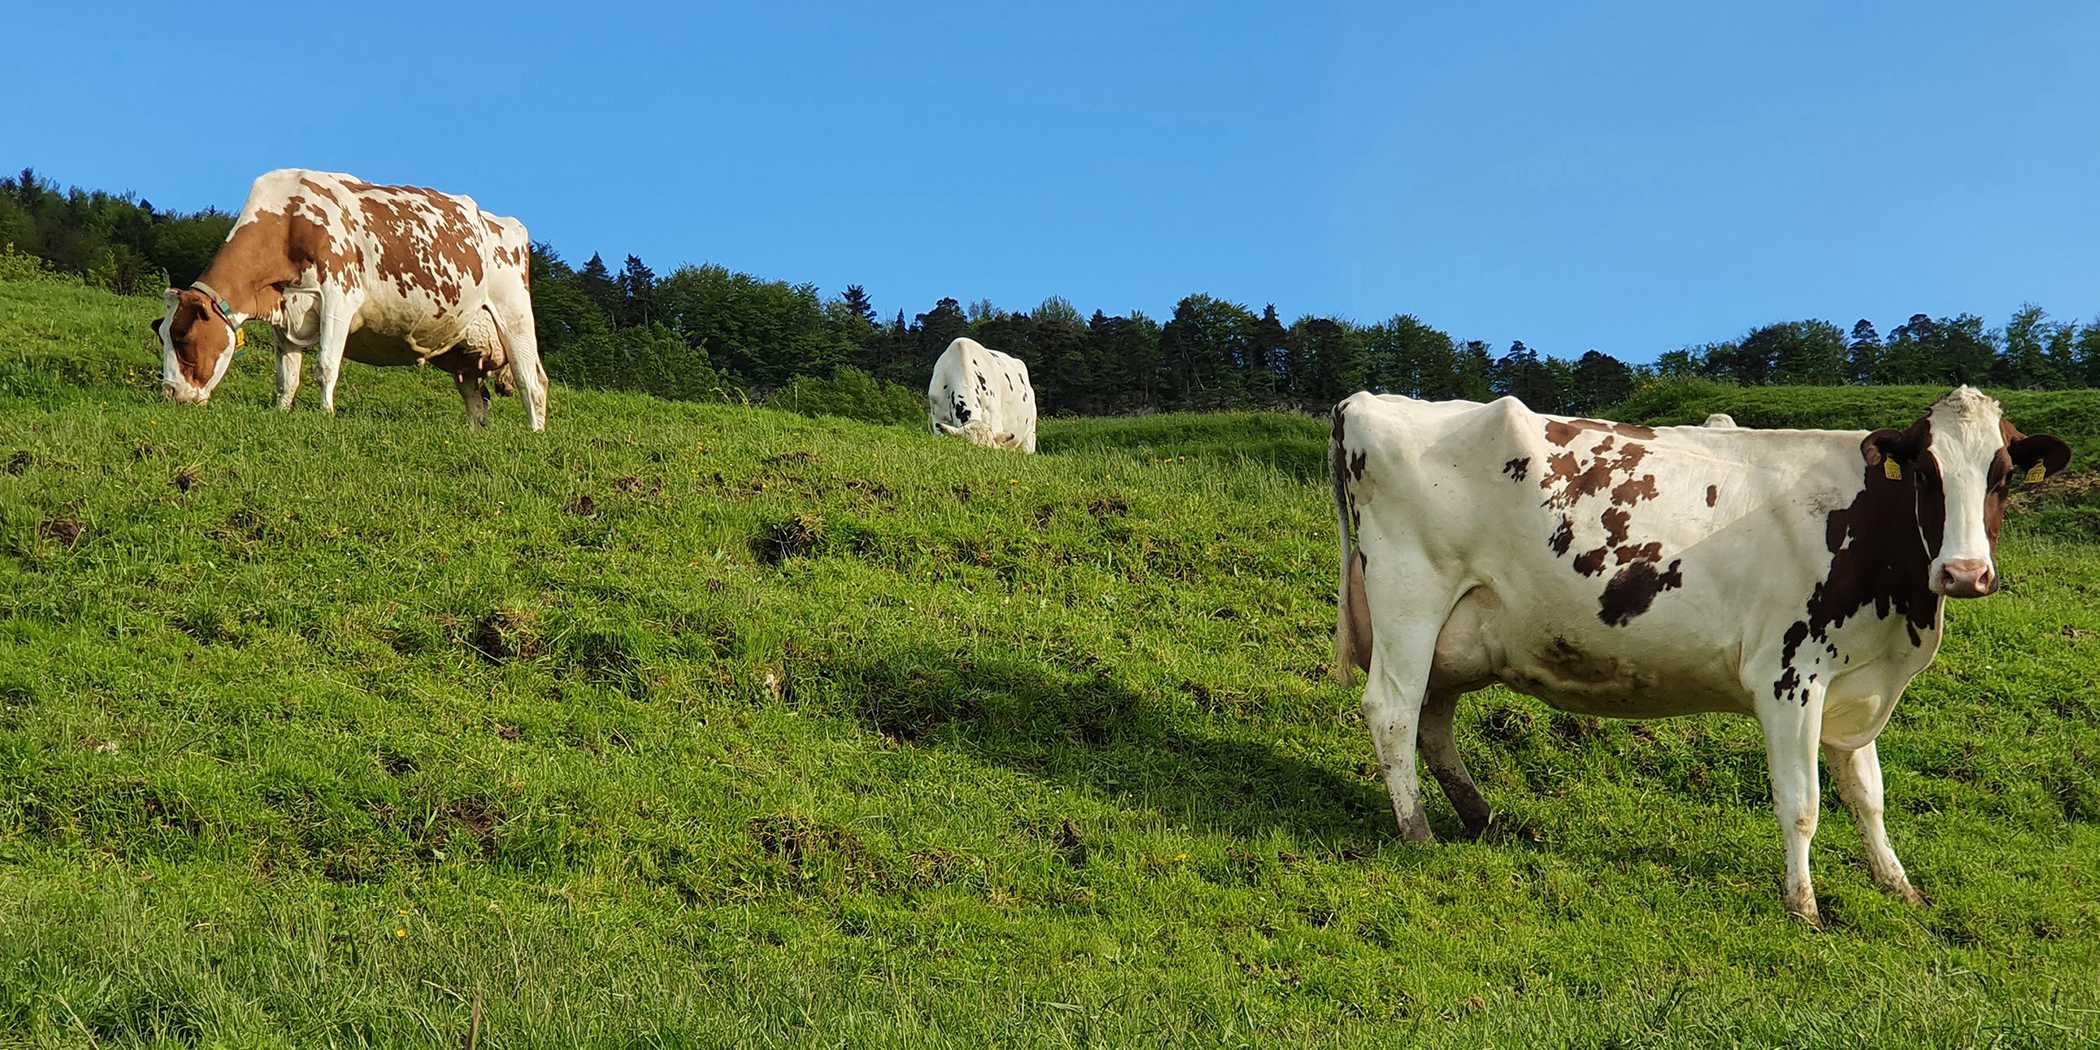 Three cows in a pasture, a strip of forest and blue sky in the background